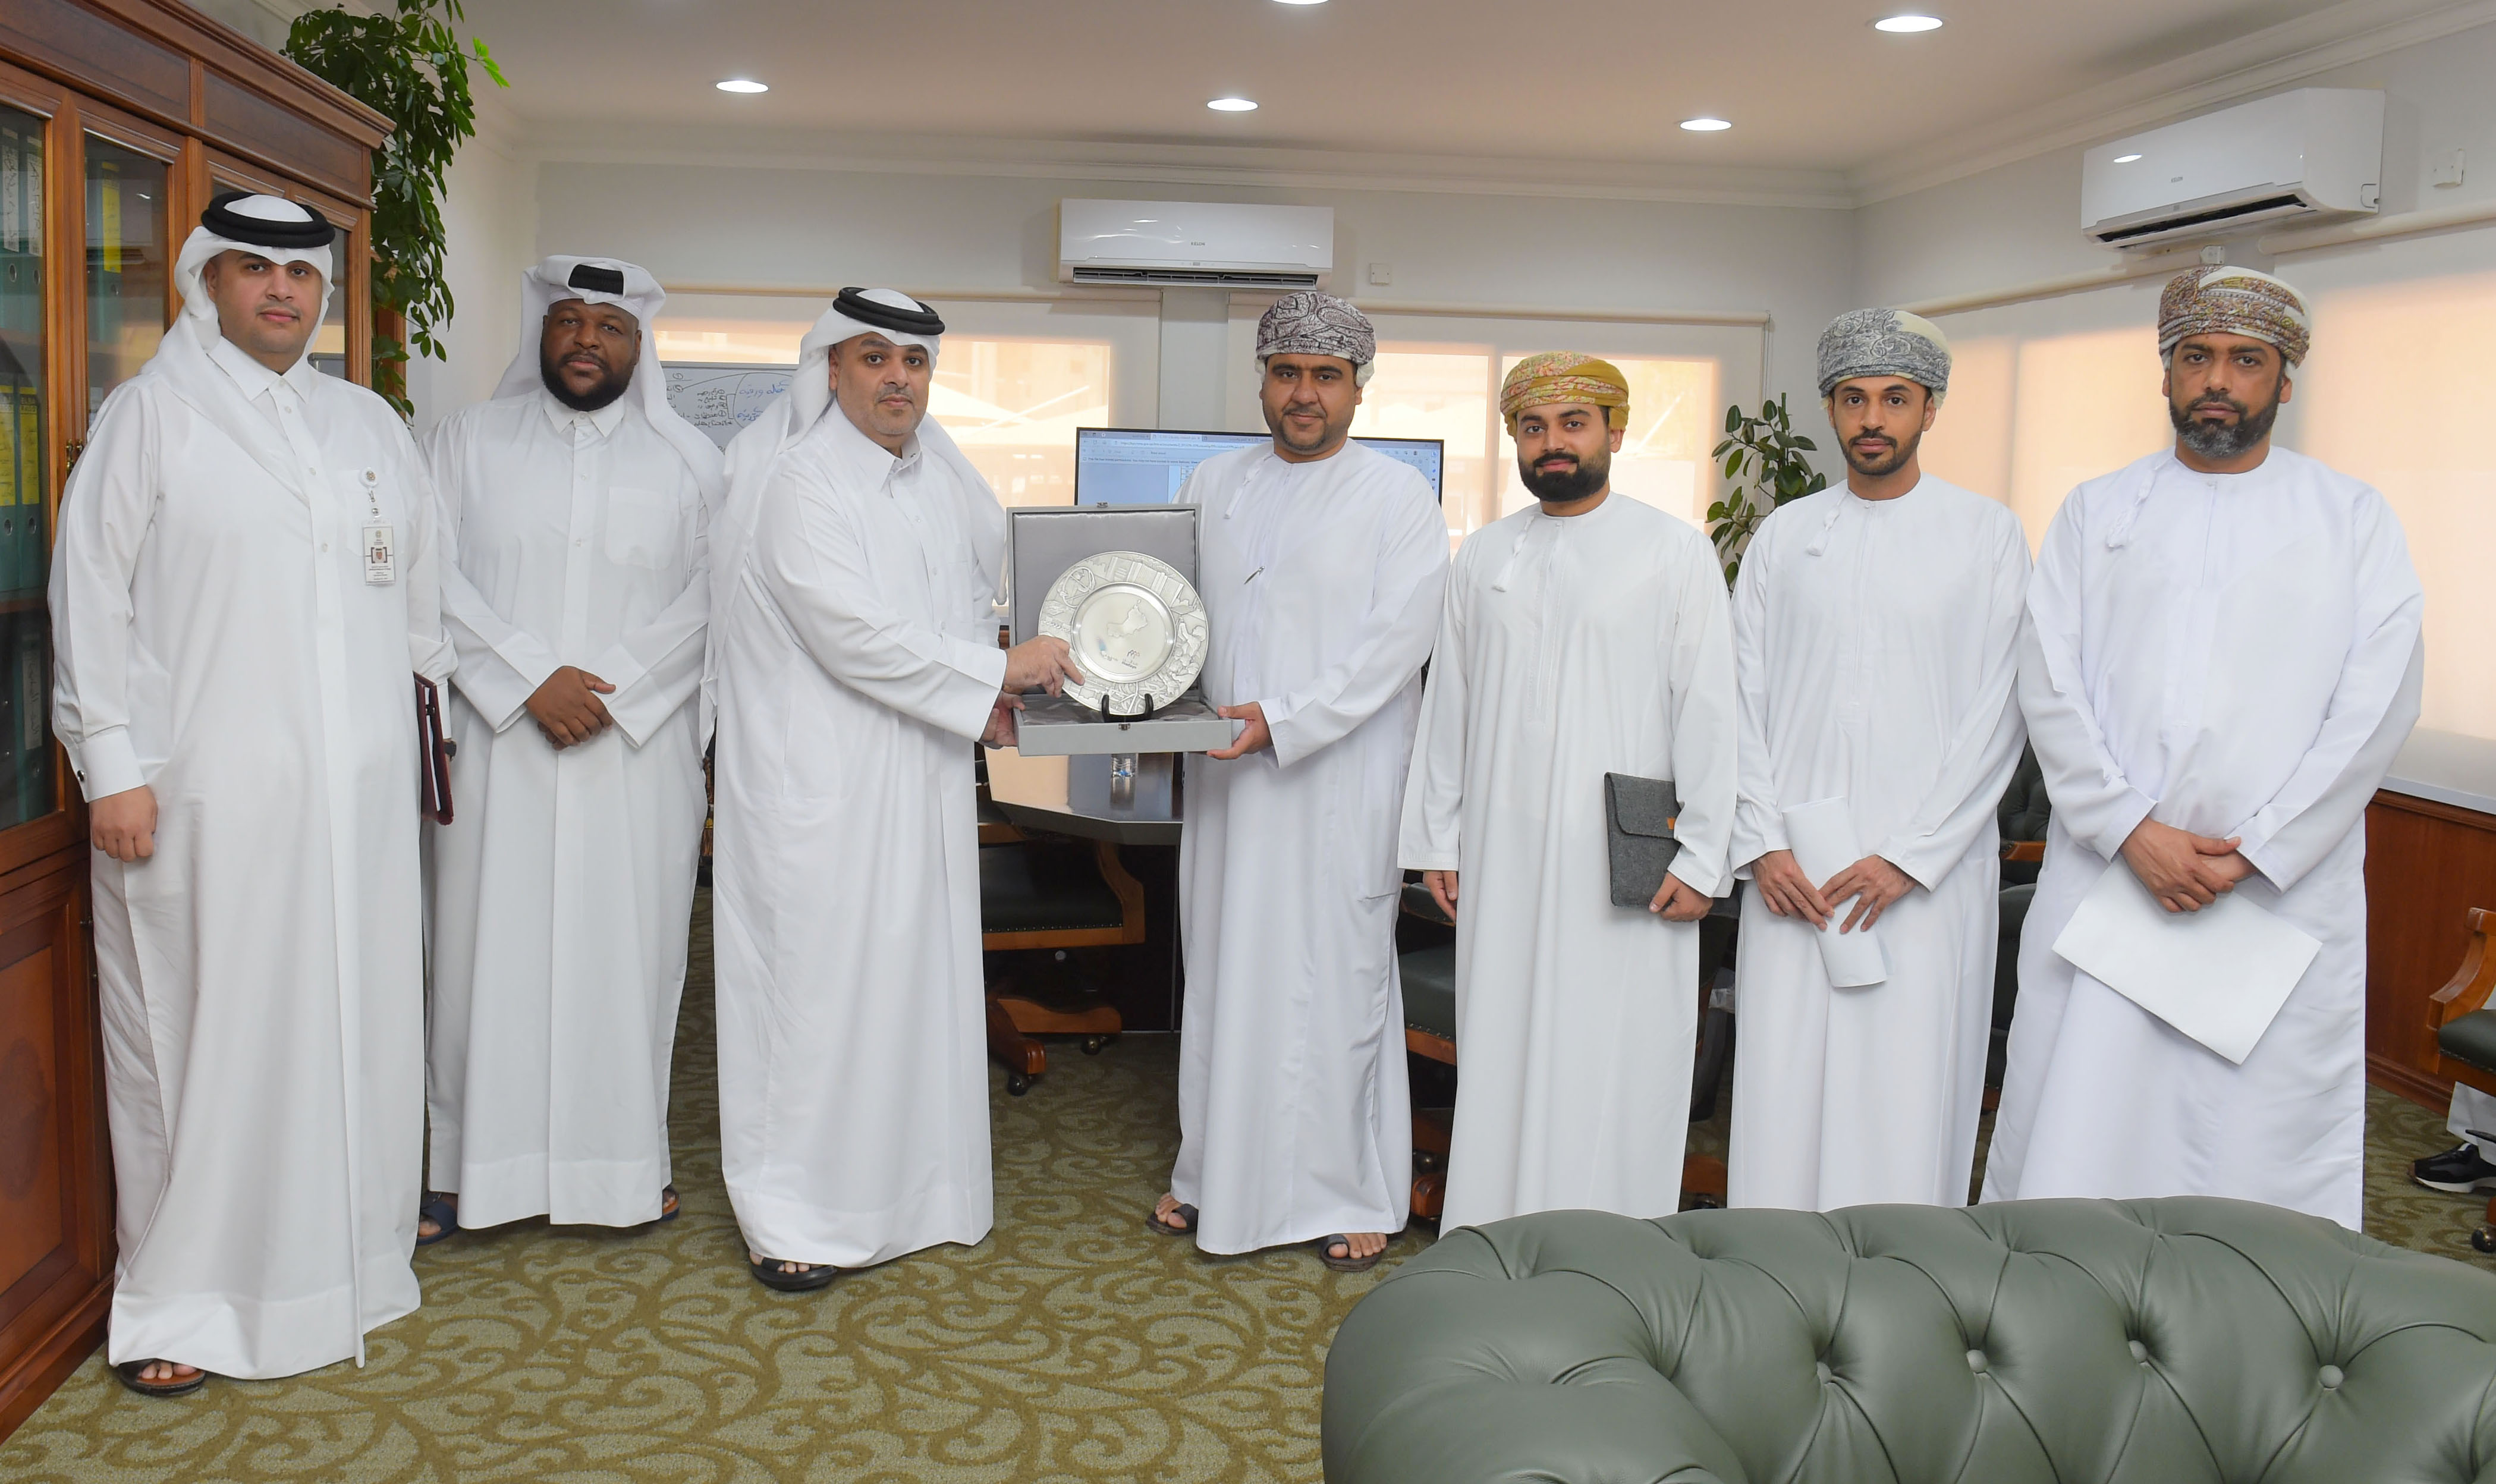 Department of Building Permits Complex Welcomes Delegation from the Sultanate of Oman